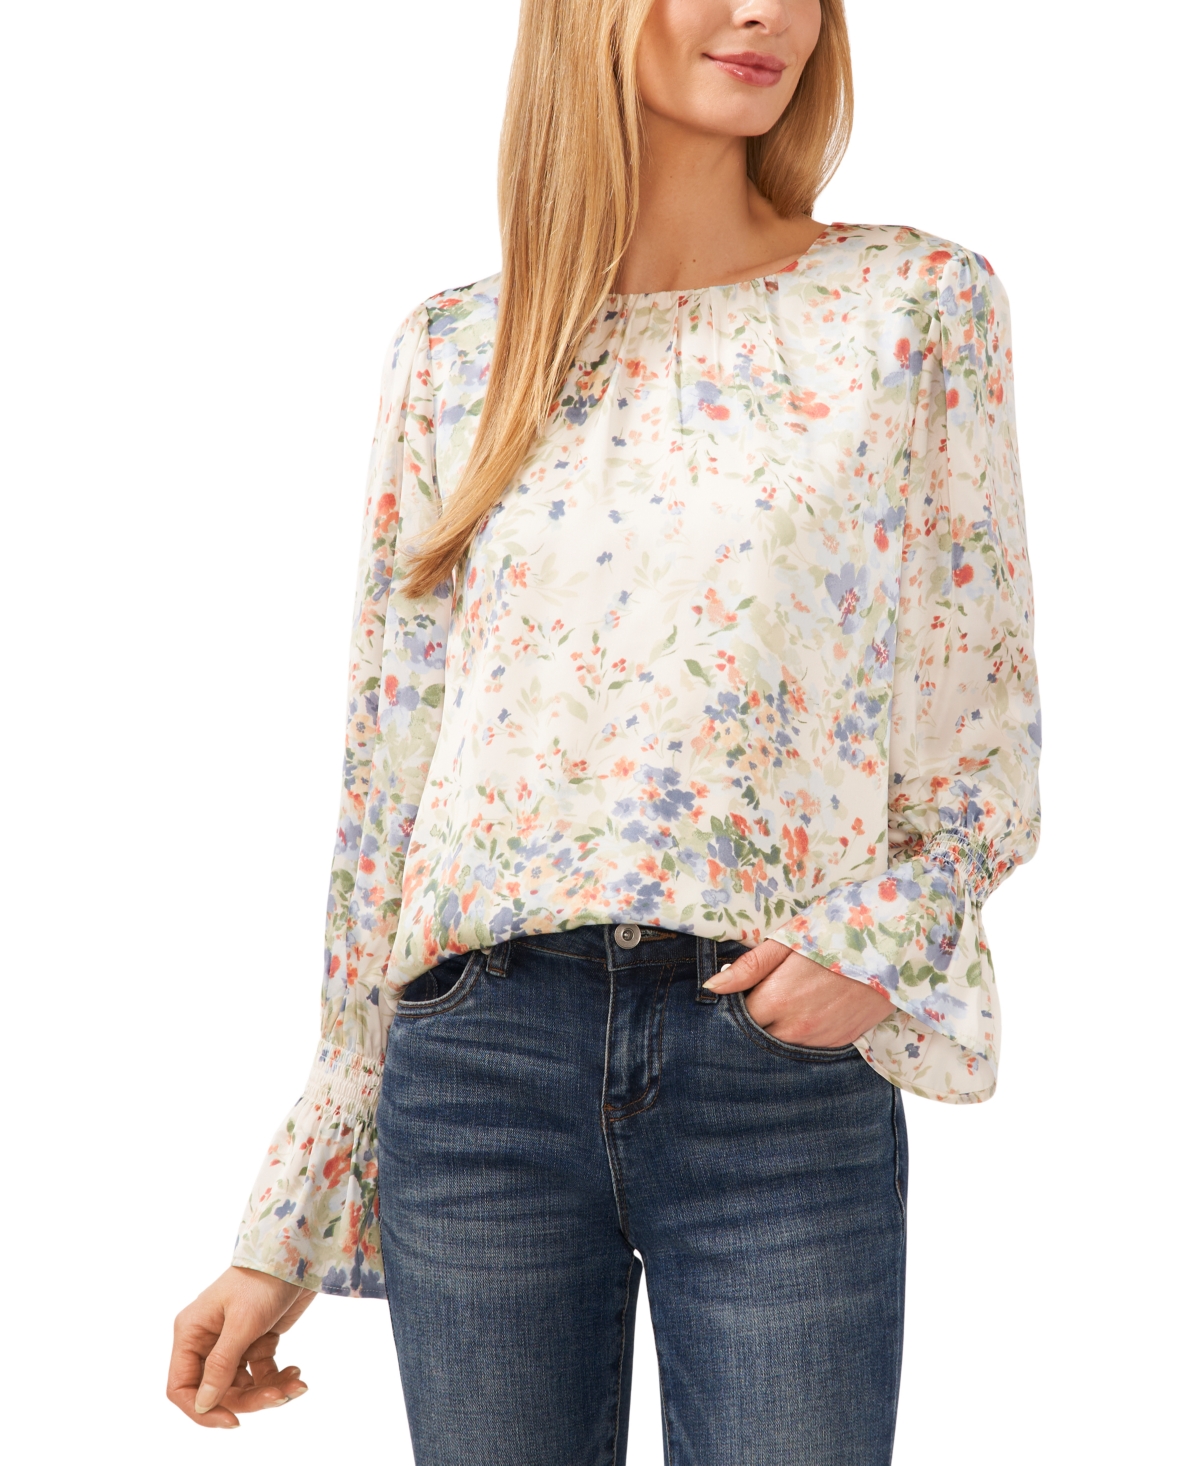 Women's Floral Print Smocked Cuff Blouse - Egret